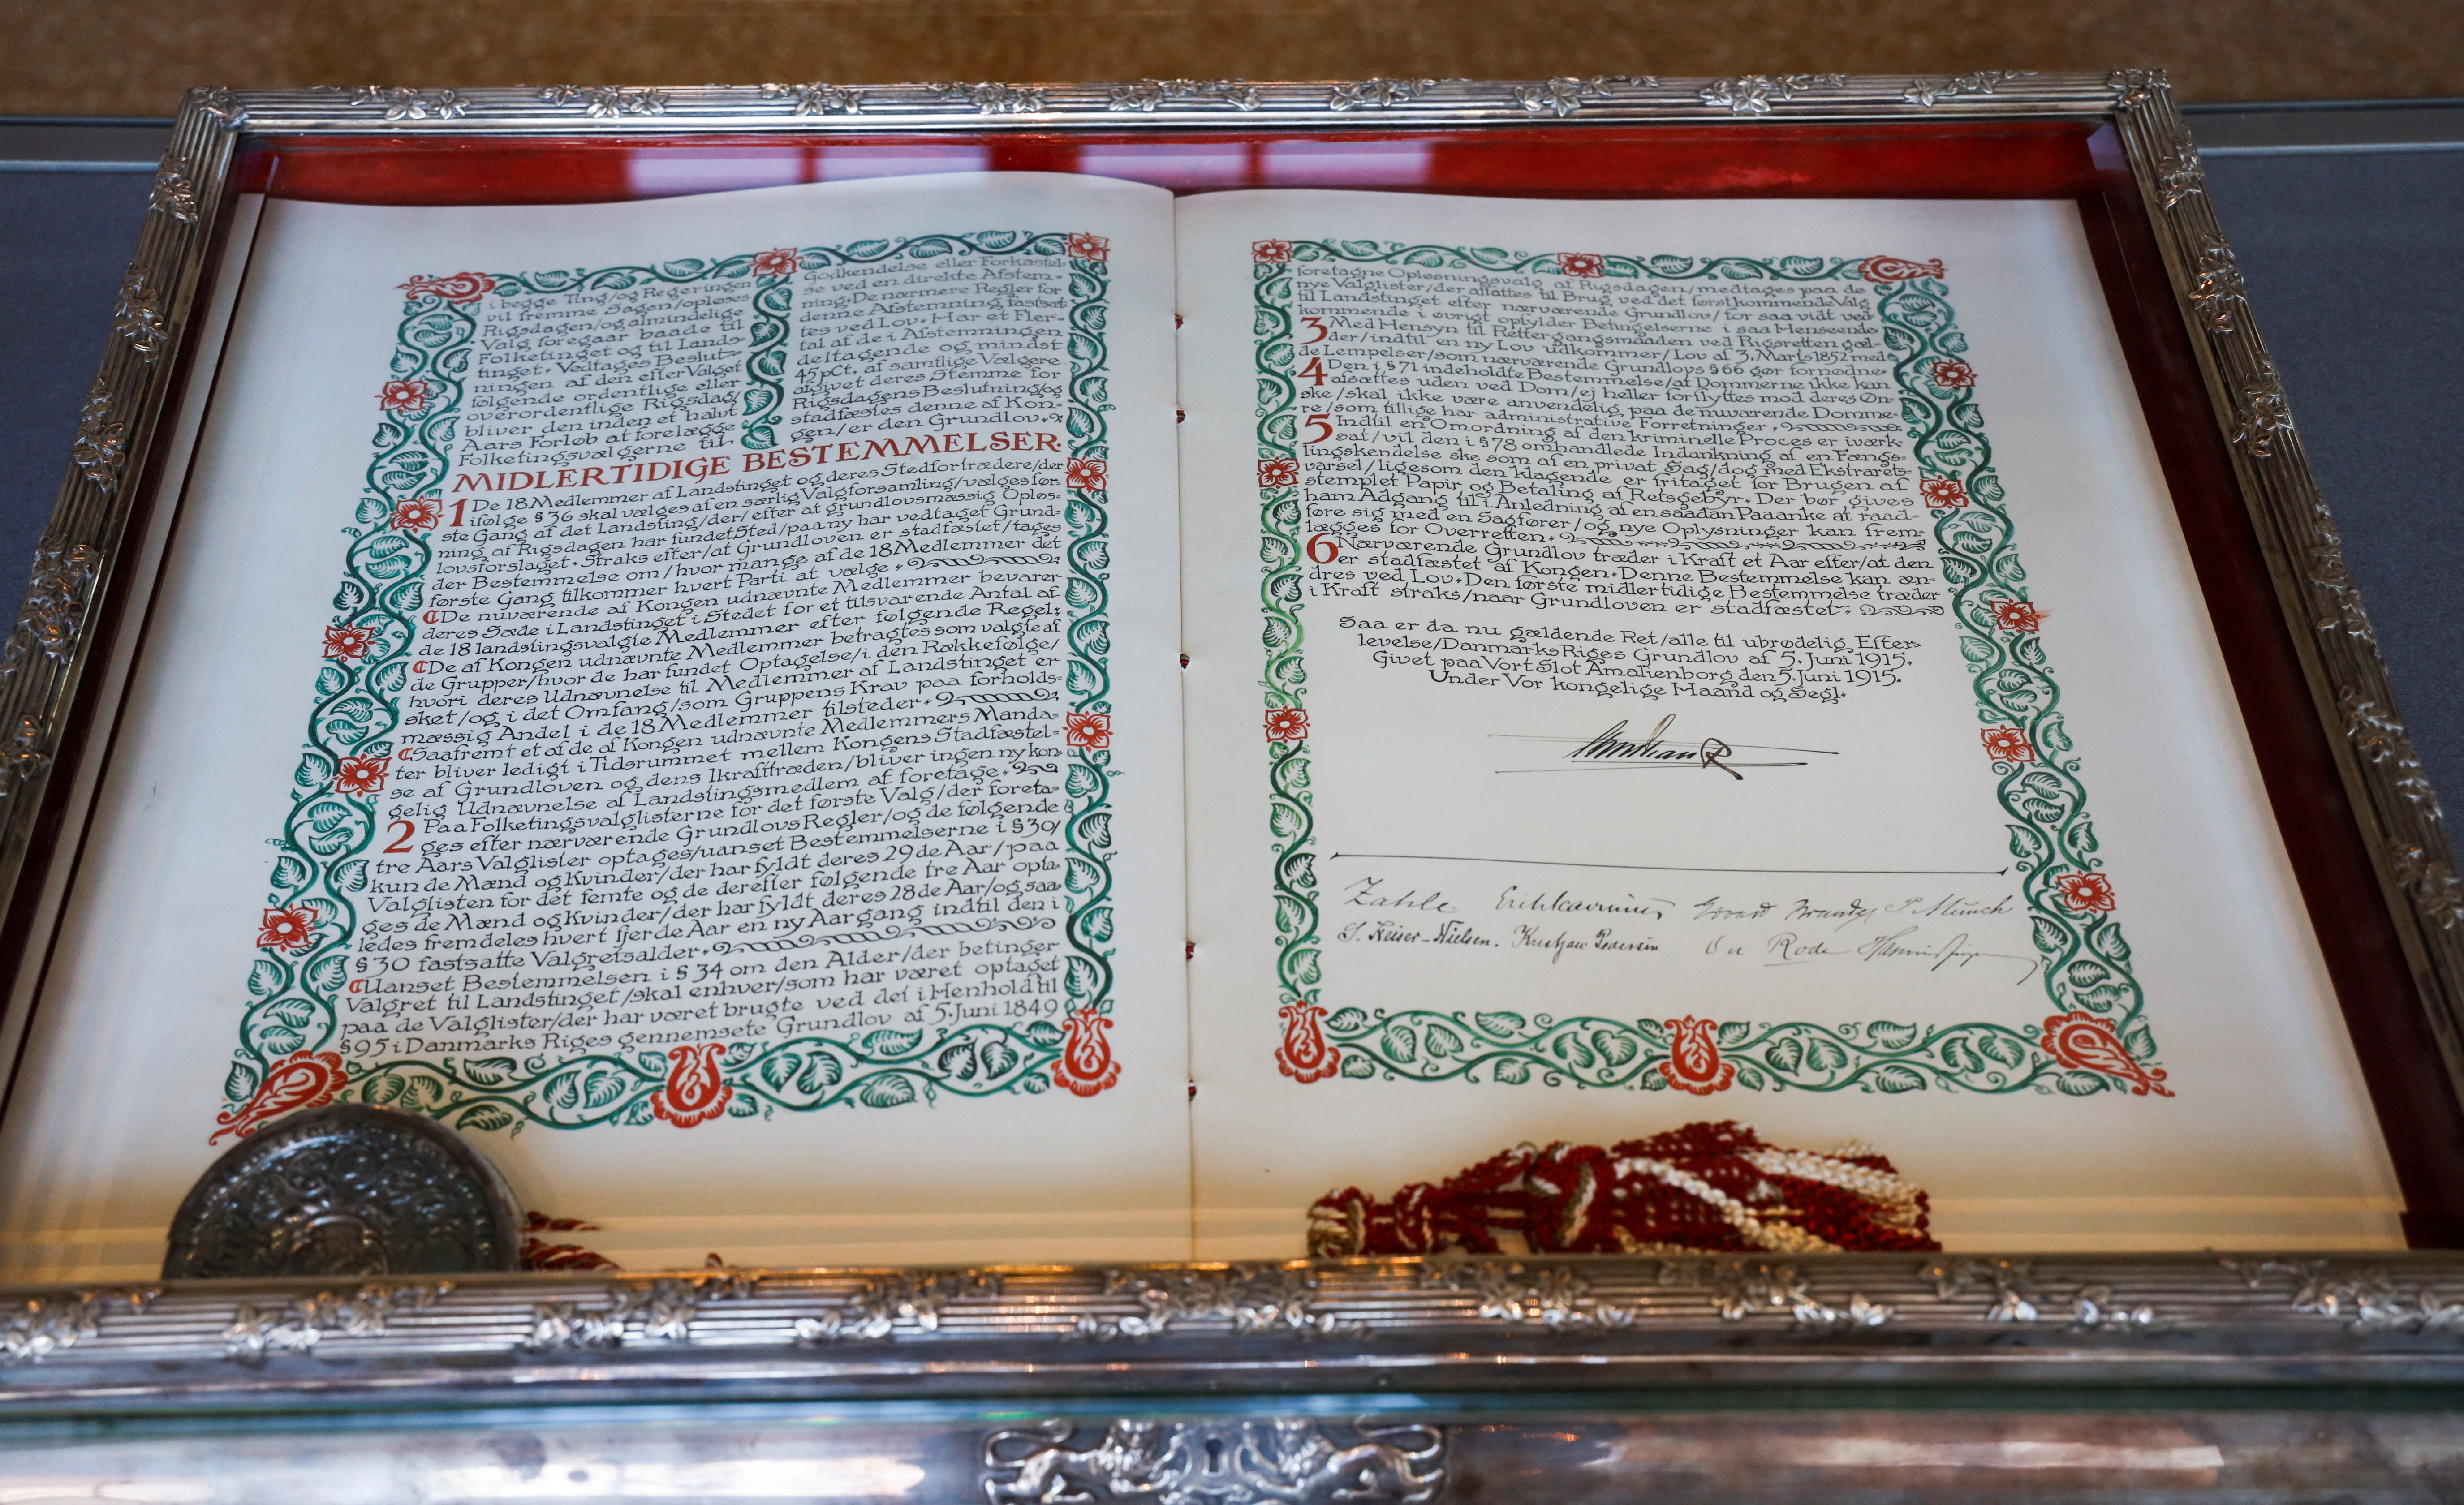 A copy of Denmark's constitutional acts is on display inside the Danish parliament in Copenhagen